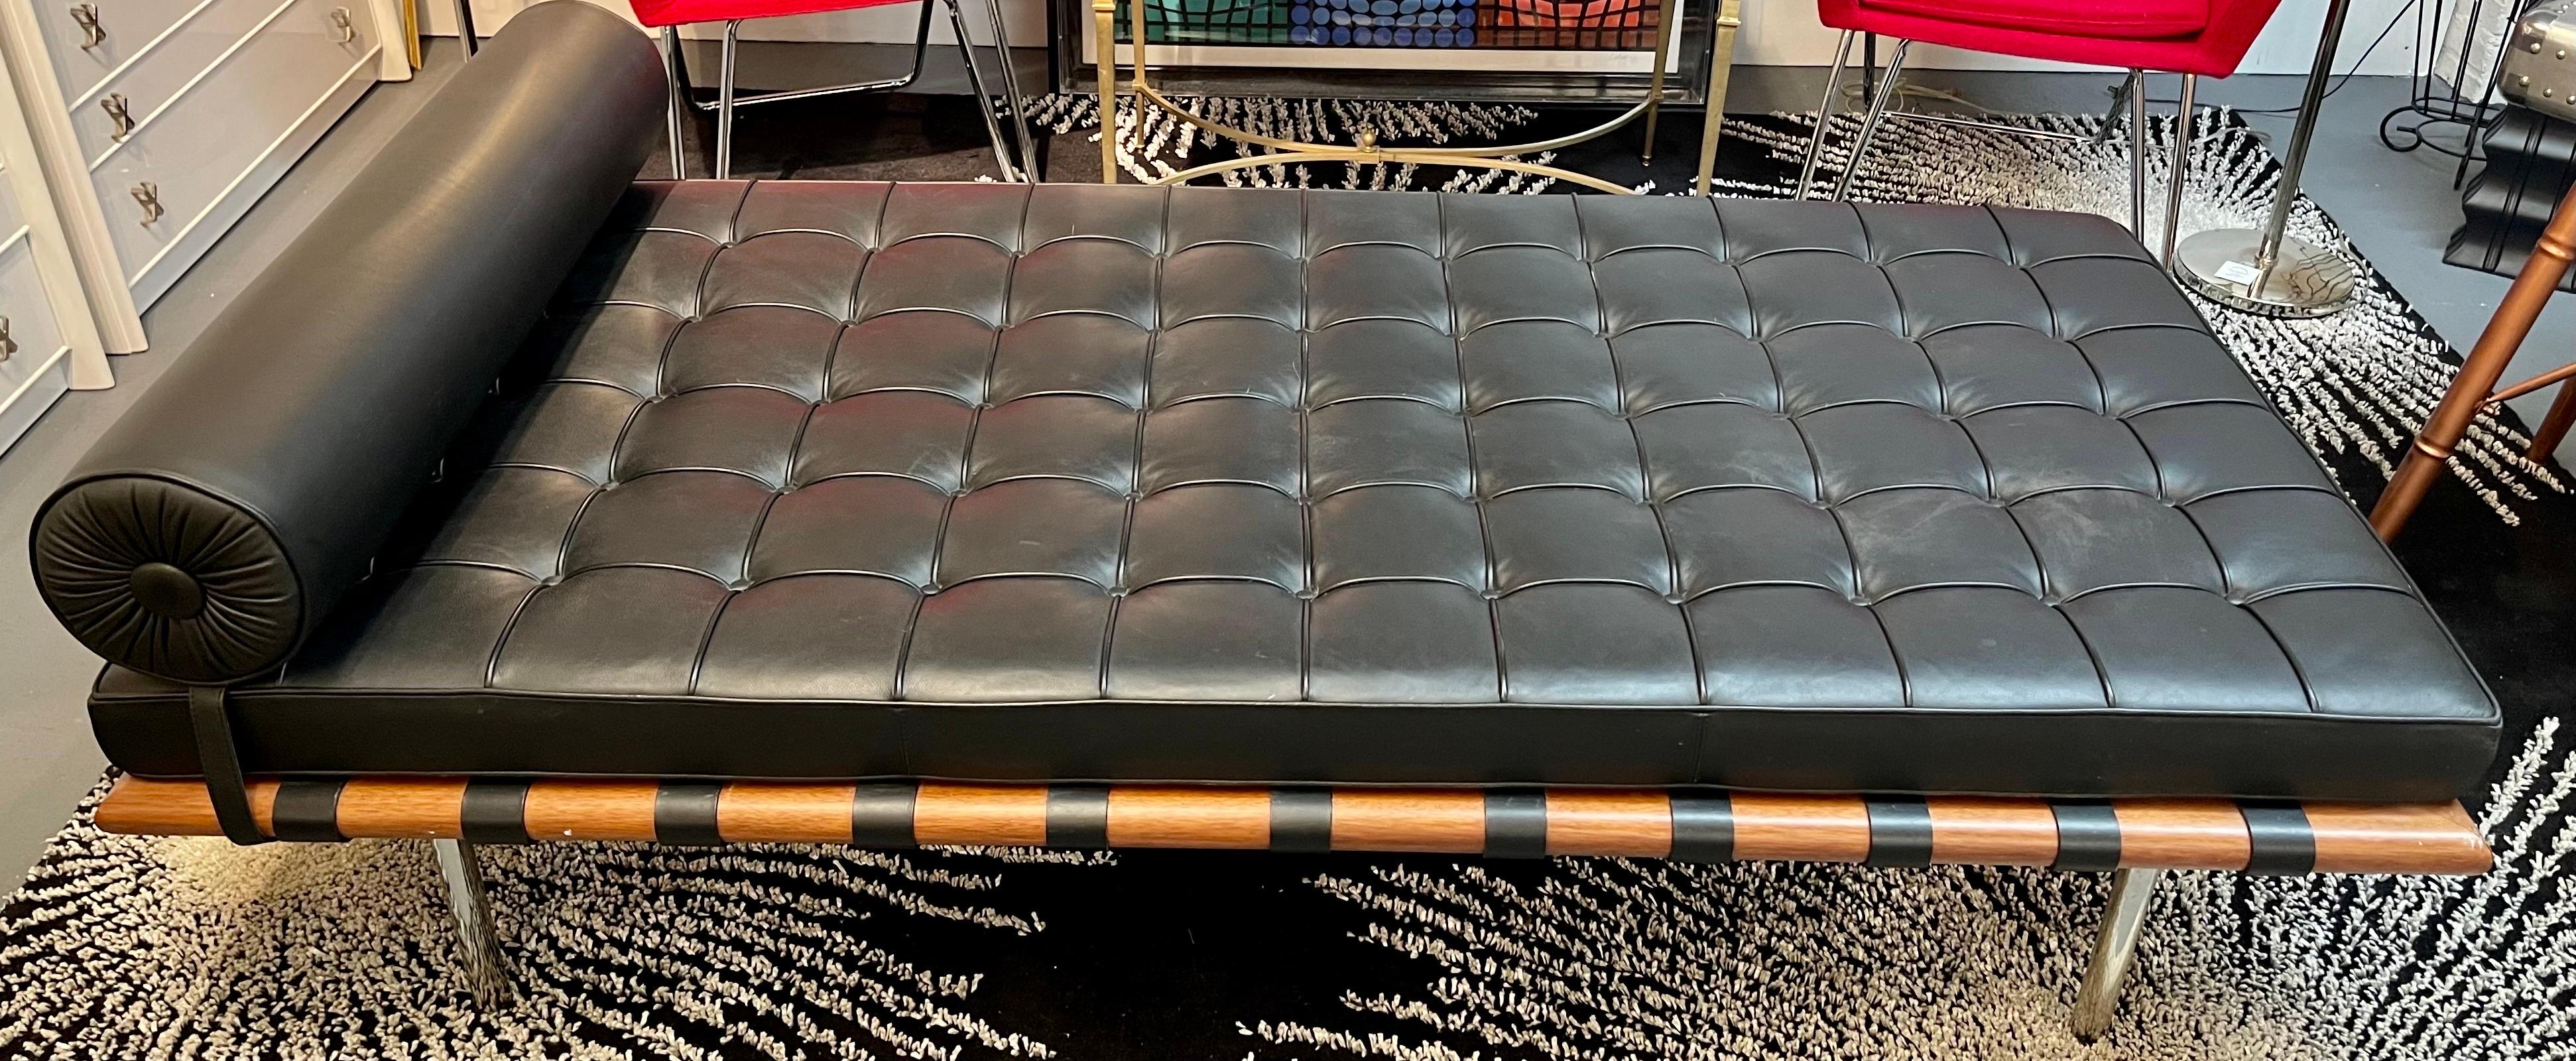 Black leather daybed designed by Ludwig Mies van der Rohe during the late 1920s with Roll pillow that straps to the bed cushion.

Perhaps it's time to own an iconic signed Knoll masterpiece by famed designer Ludwig Mies van der Rohe. This piece